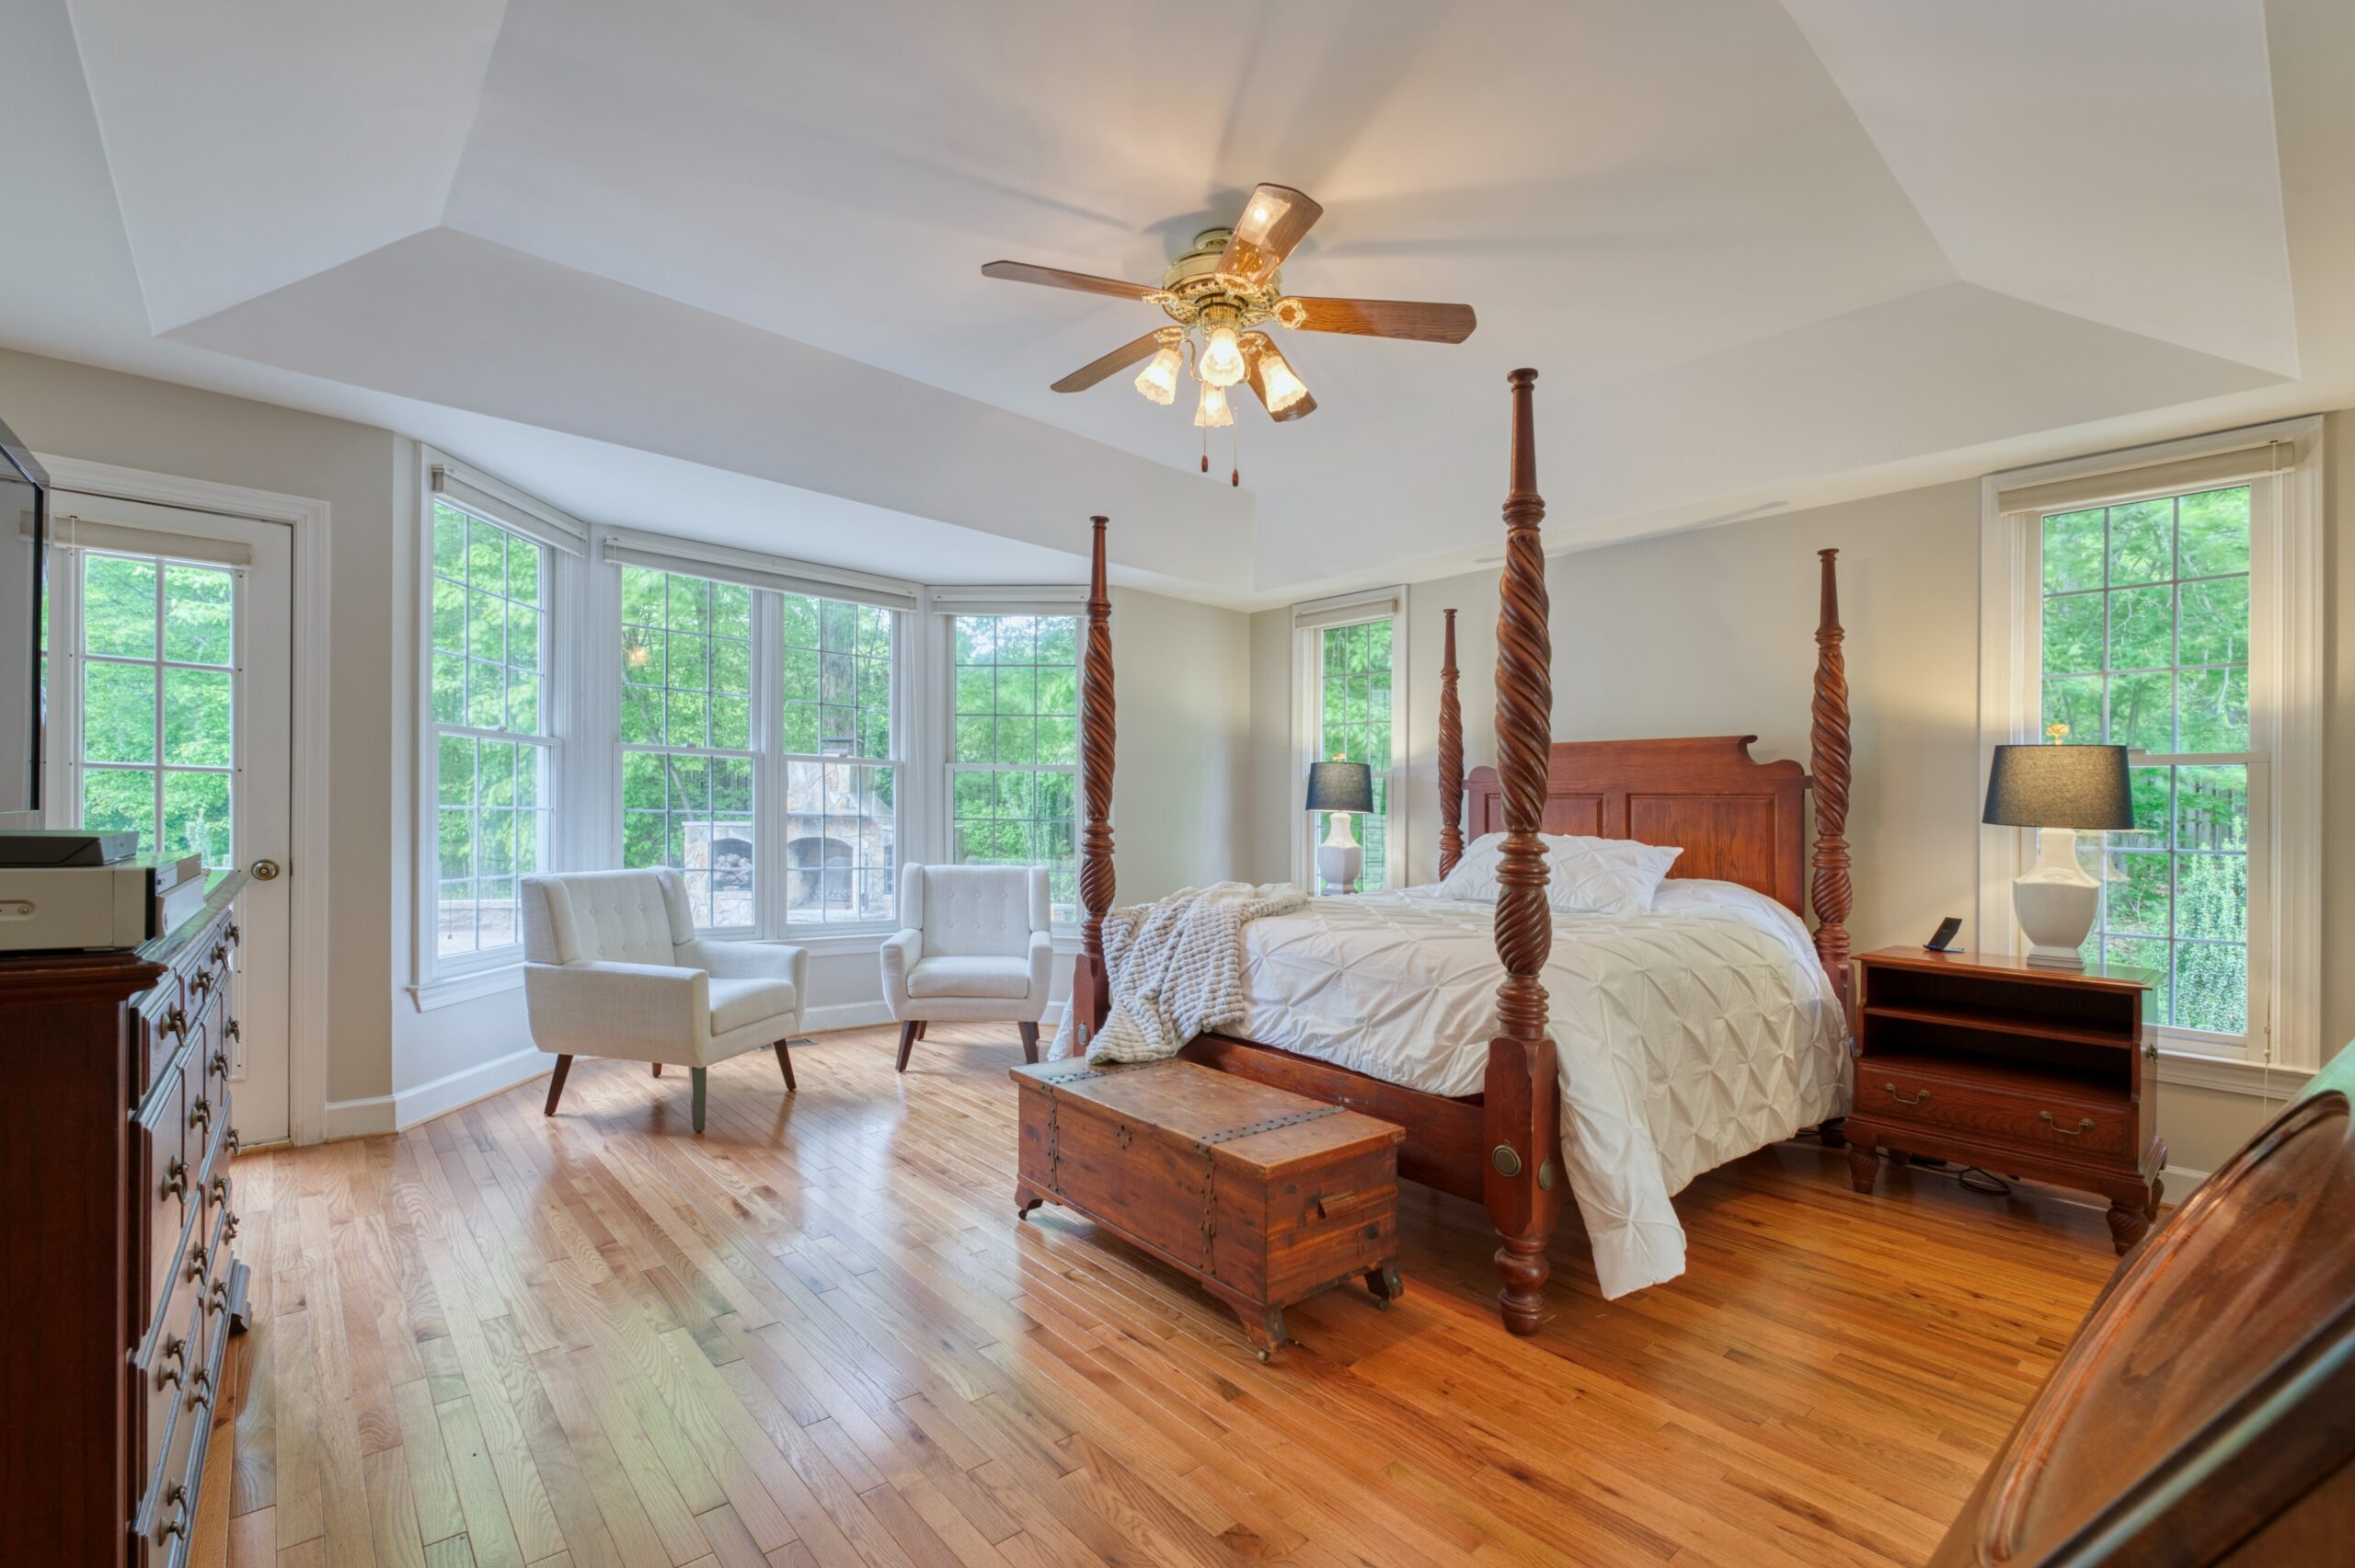 Professional interior photo of 13700 Holly Forest Dr - showing the master bedroom with deep tray ceiling and ceiling fan, hardwood floors, lots of windows and a door out the private patio